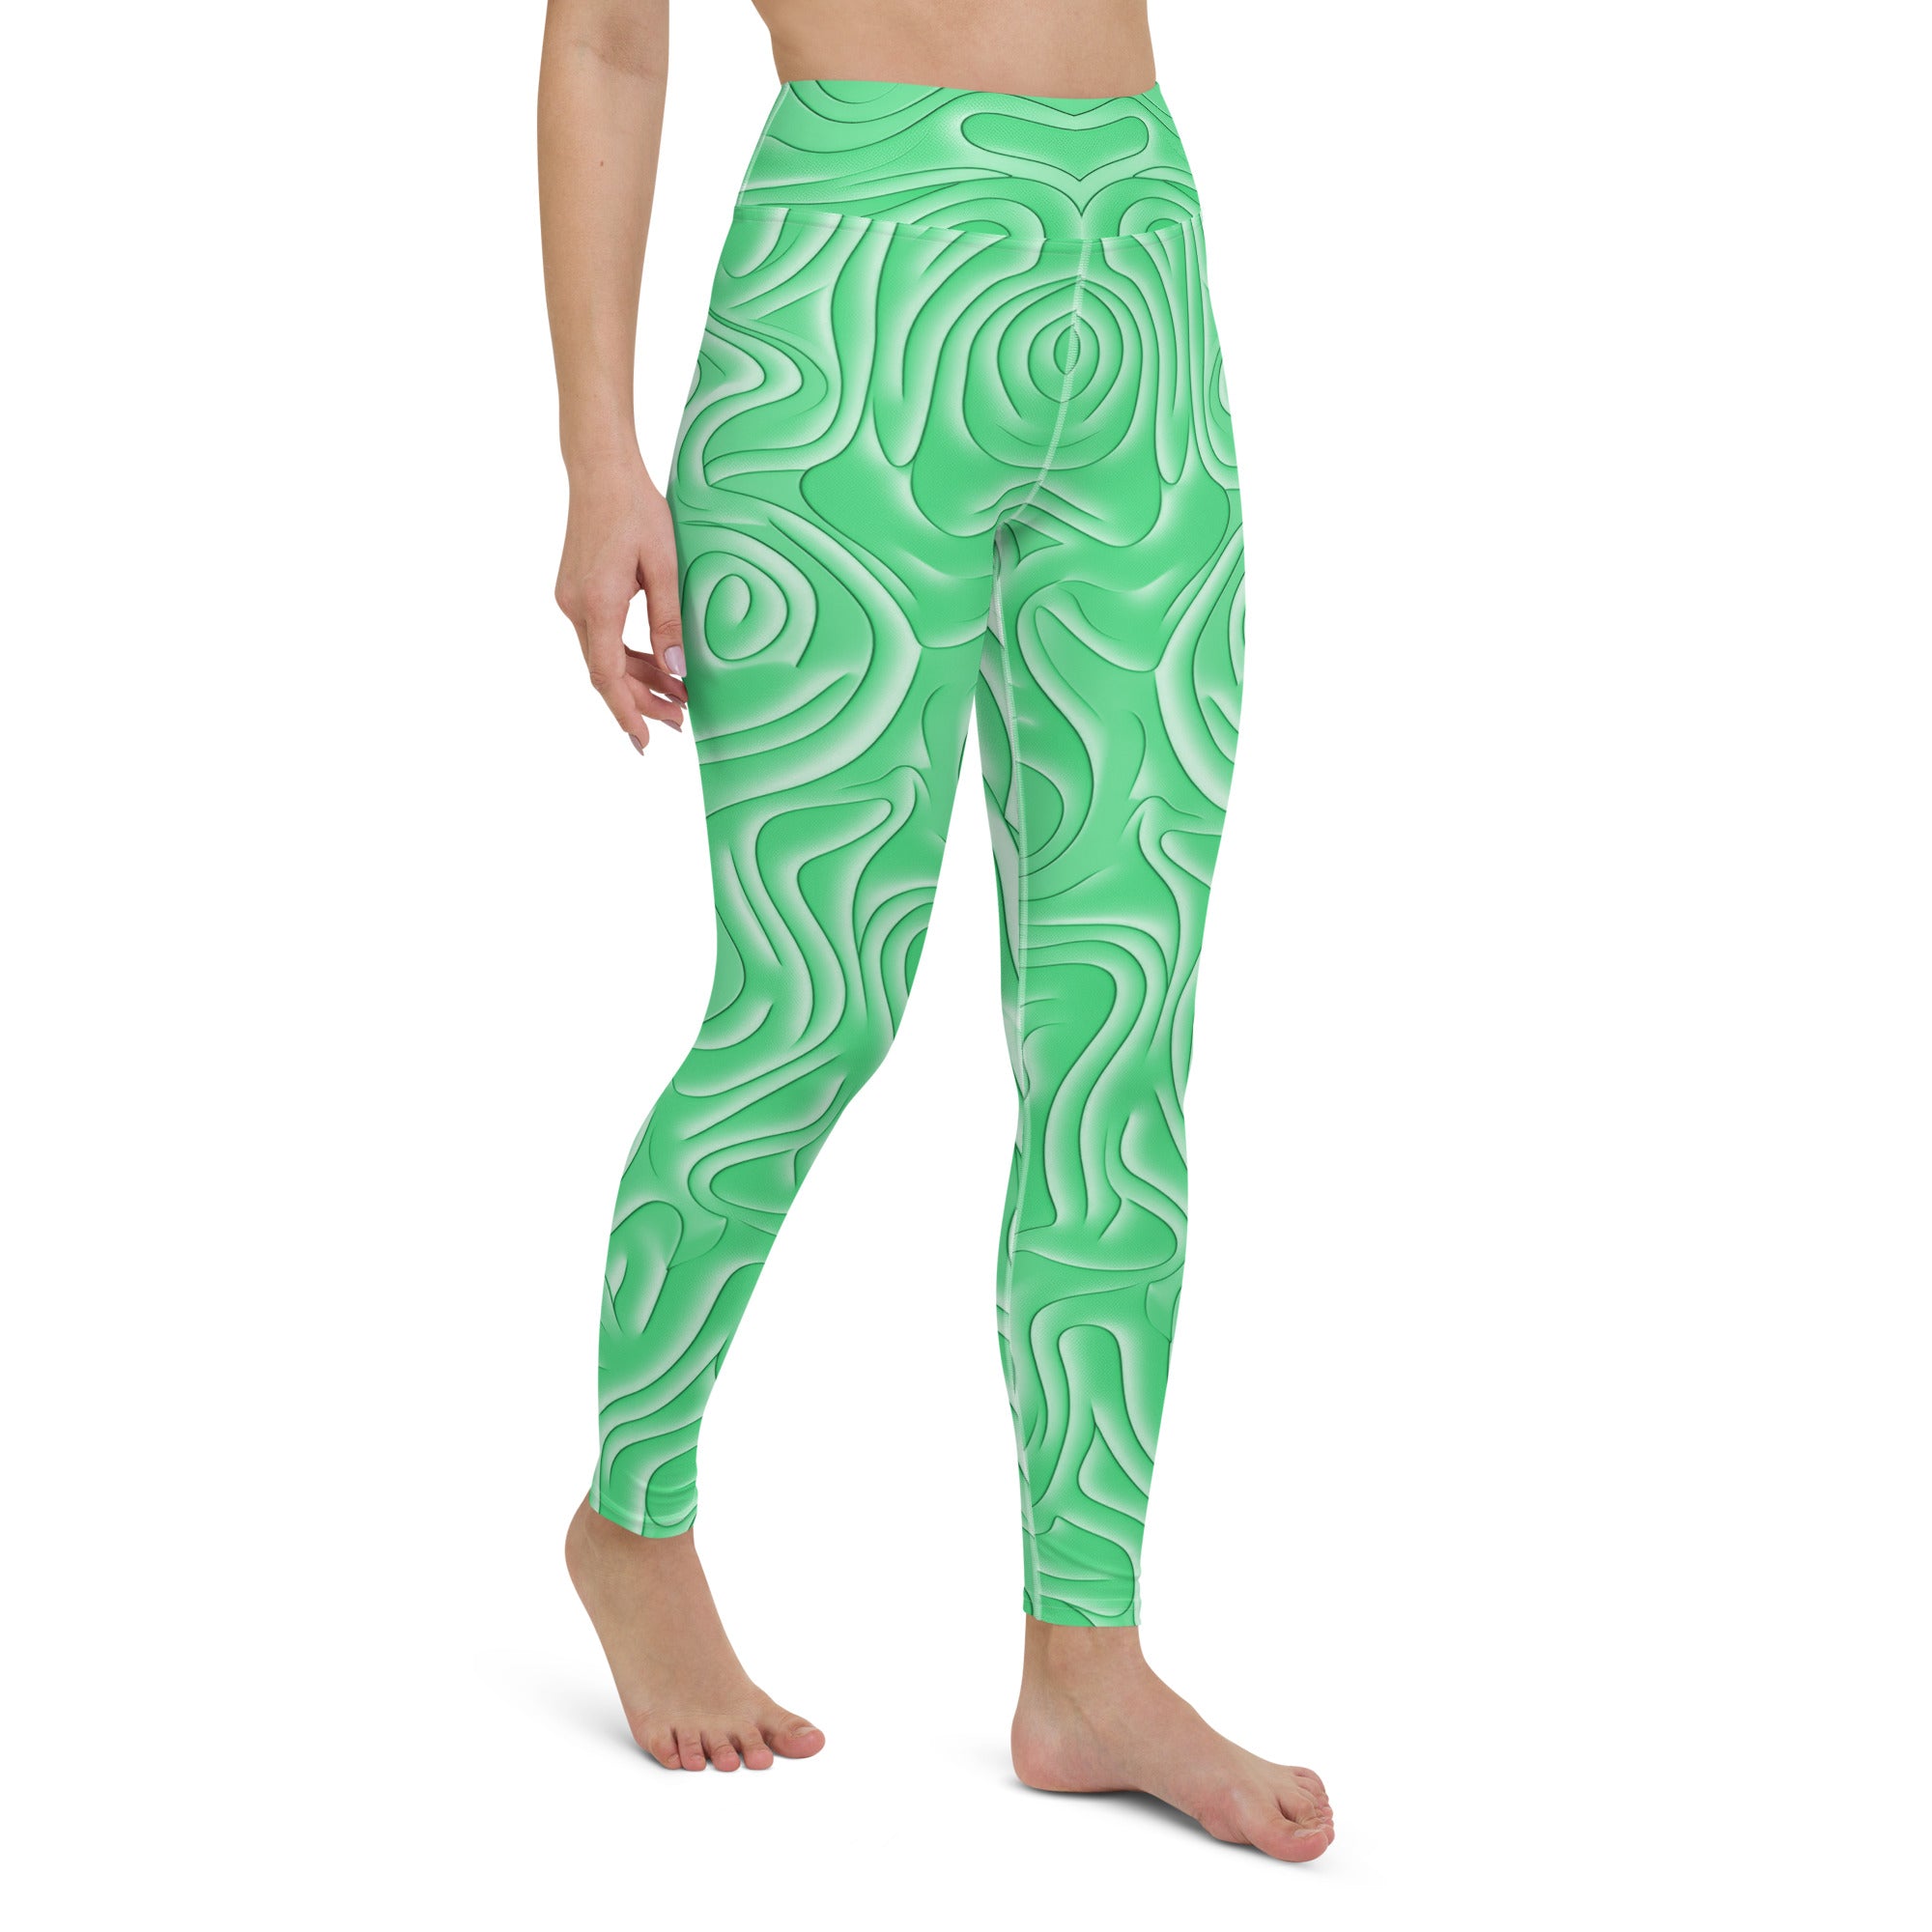 Vibrant Vibes All-Over Print Yoga Leggings on a clothing mannequin.